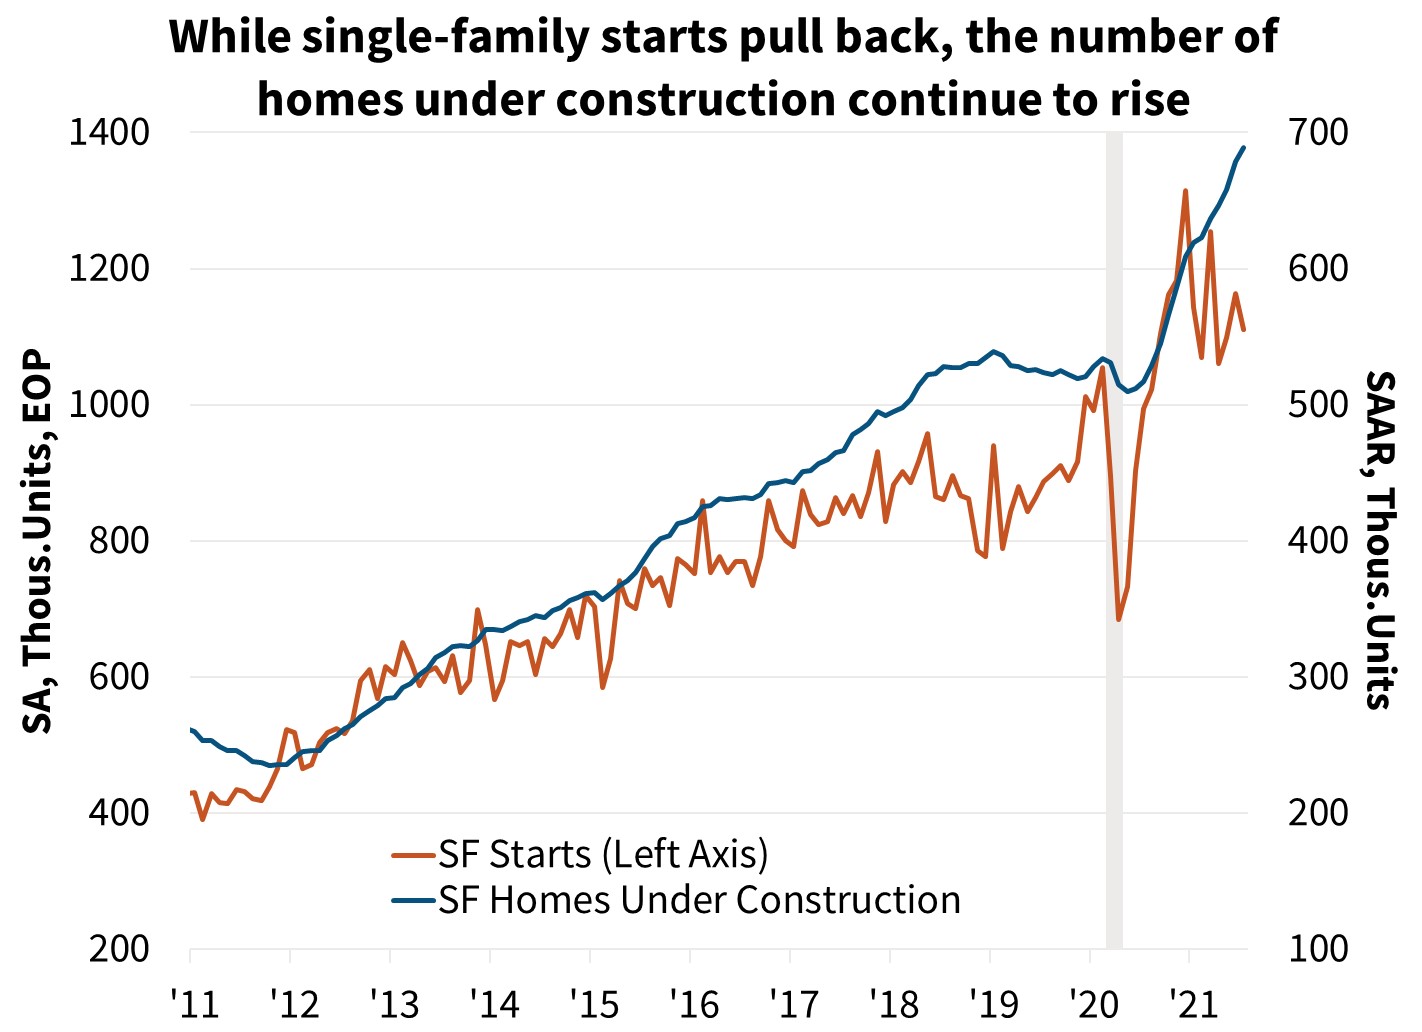  While single-family starts pull back the number of homes under construction continue to rise